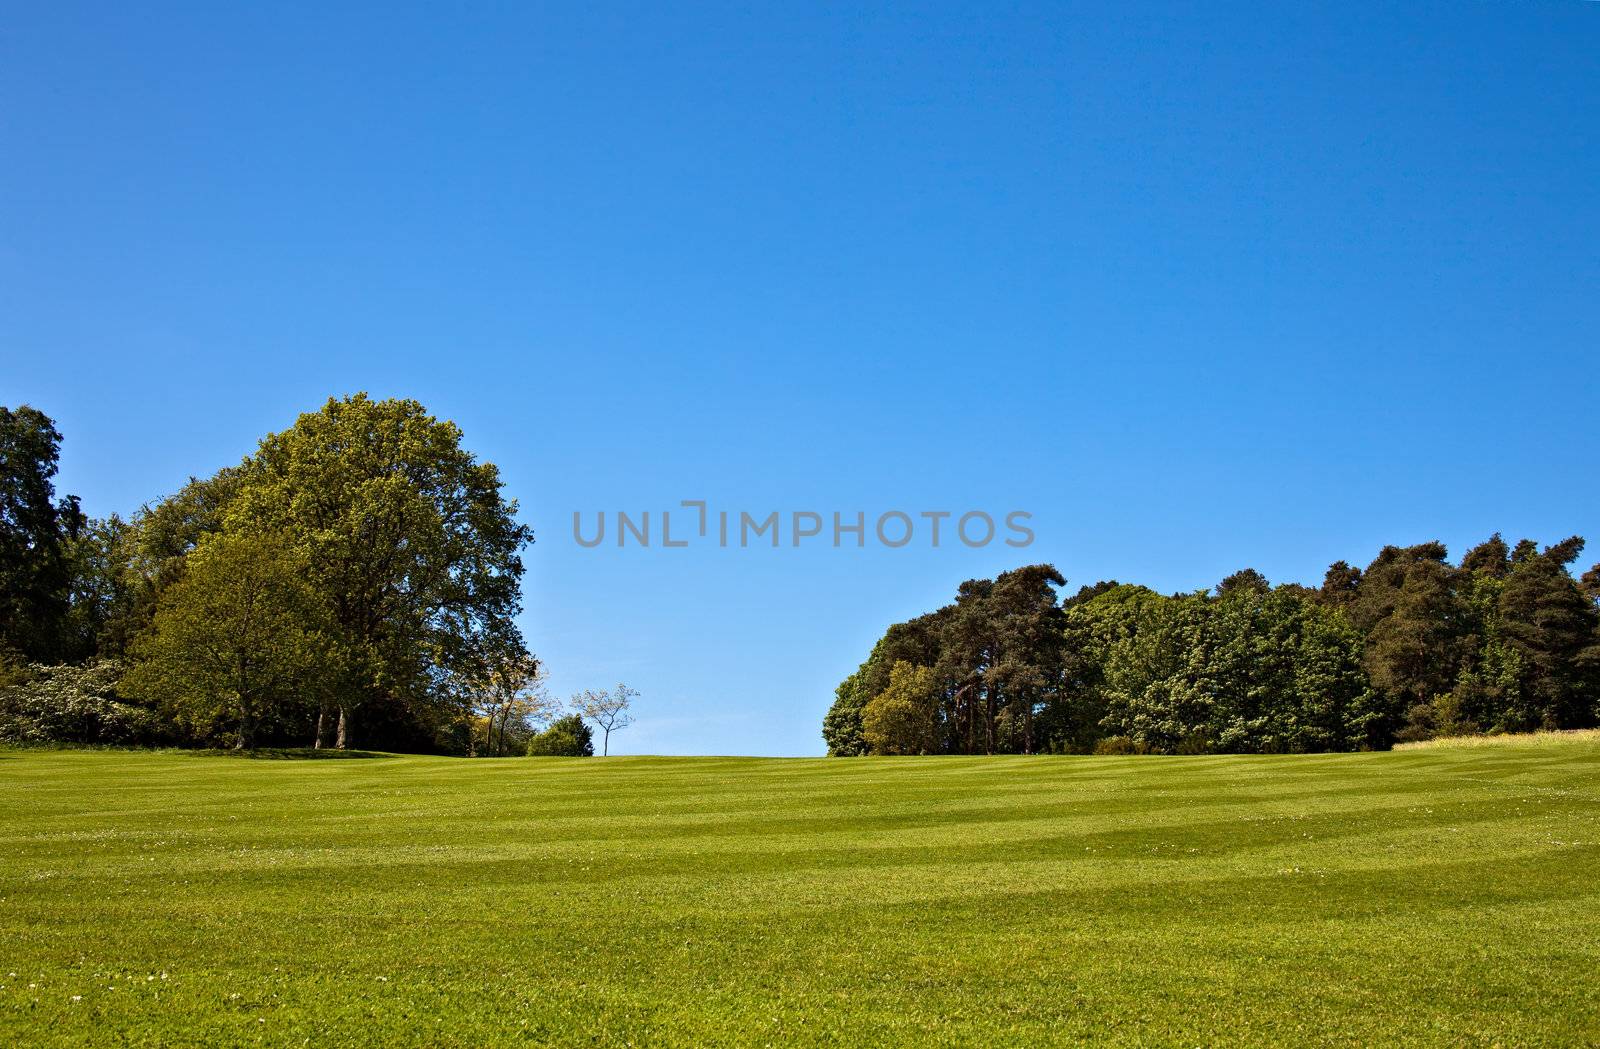 A beautiful striped lawn with trees in the background